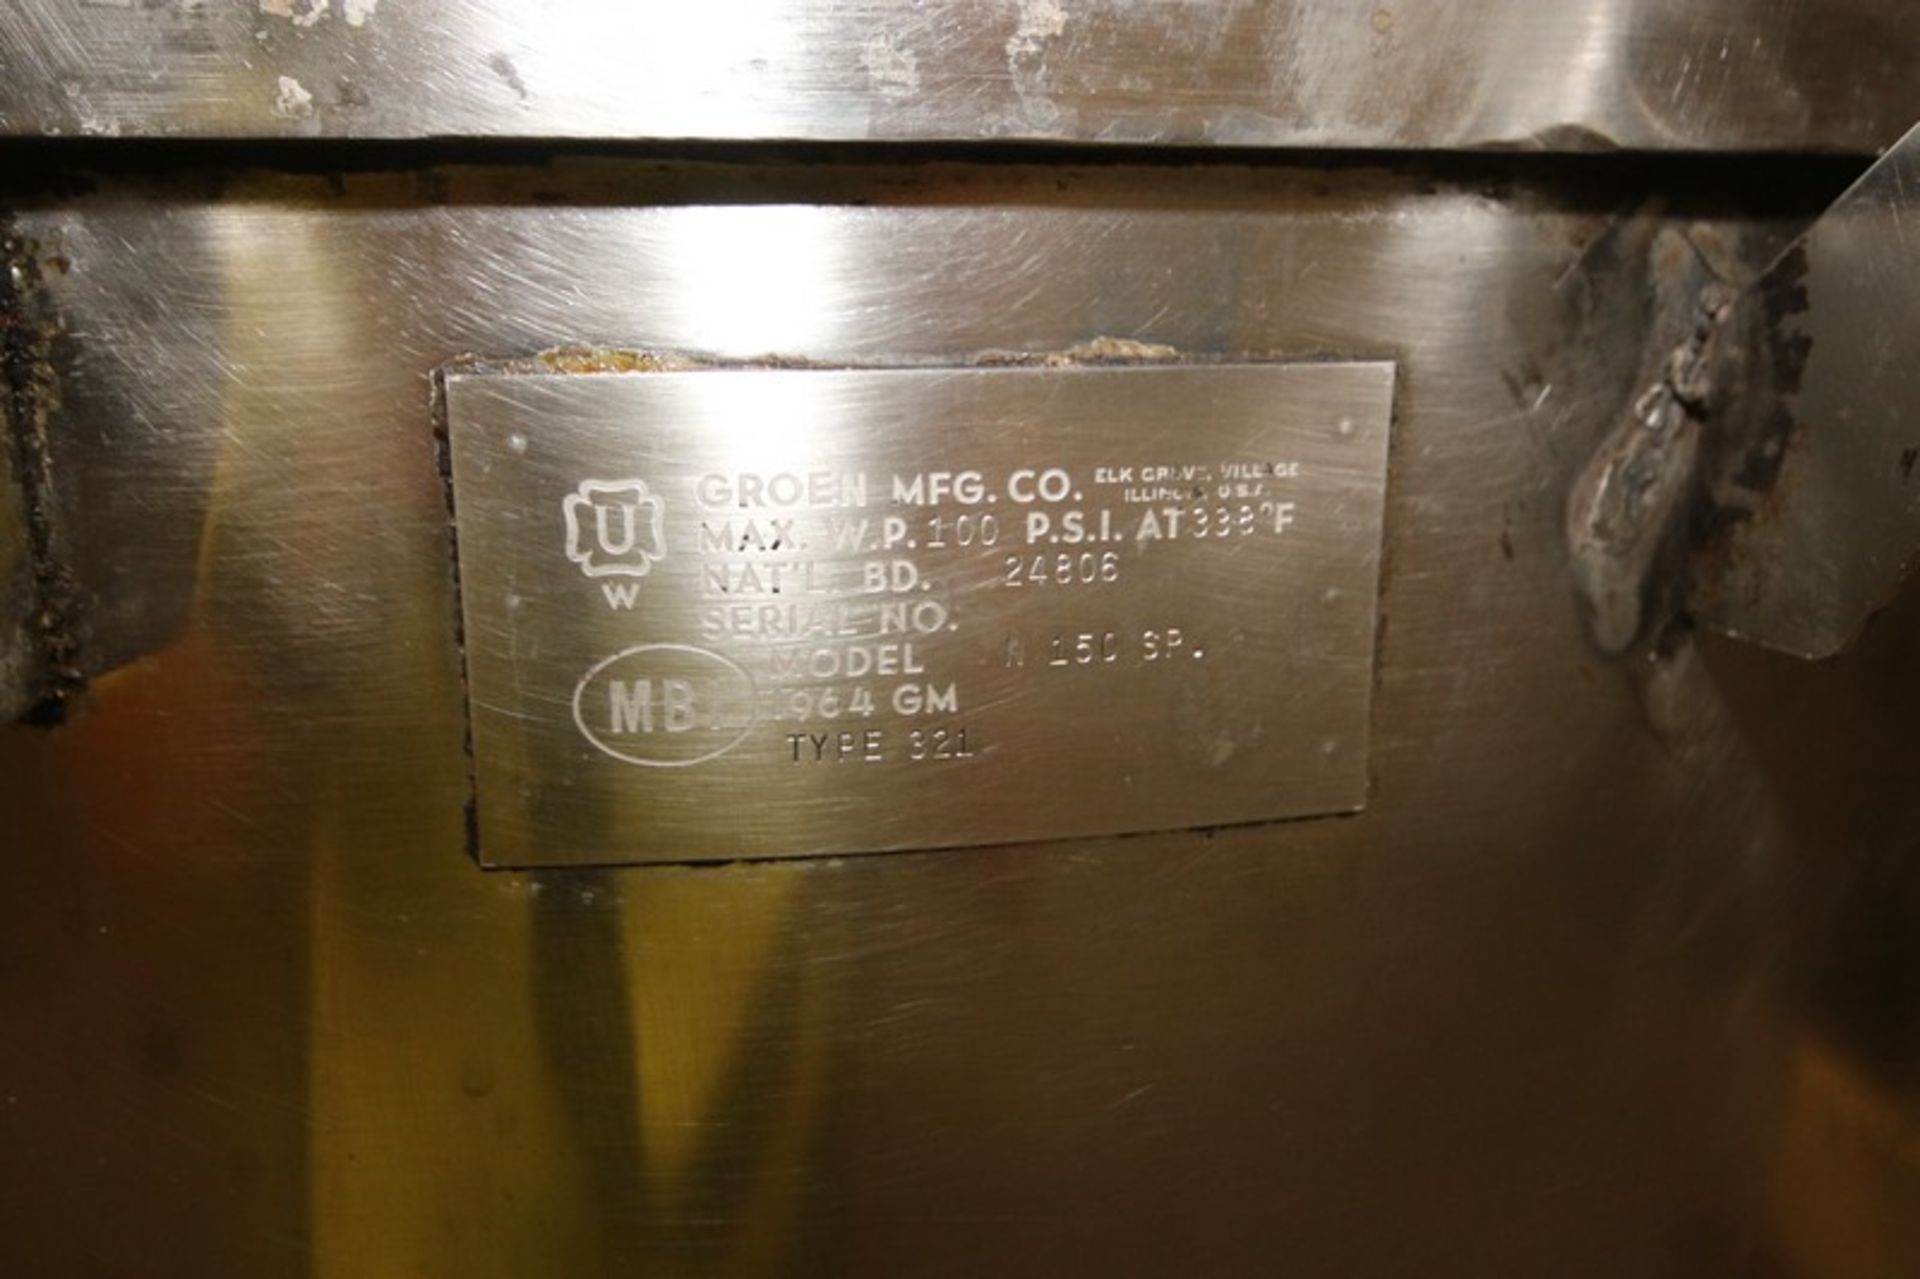 Groen 150 Gal. S/S Kettle,M/N N150SP, MAX. W.P. 100 PSI @ 338 F, Mounted on S/S Legs (INV#80192)( - Image 5 of 7